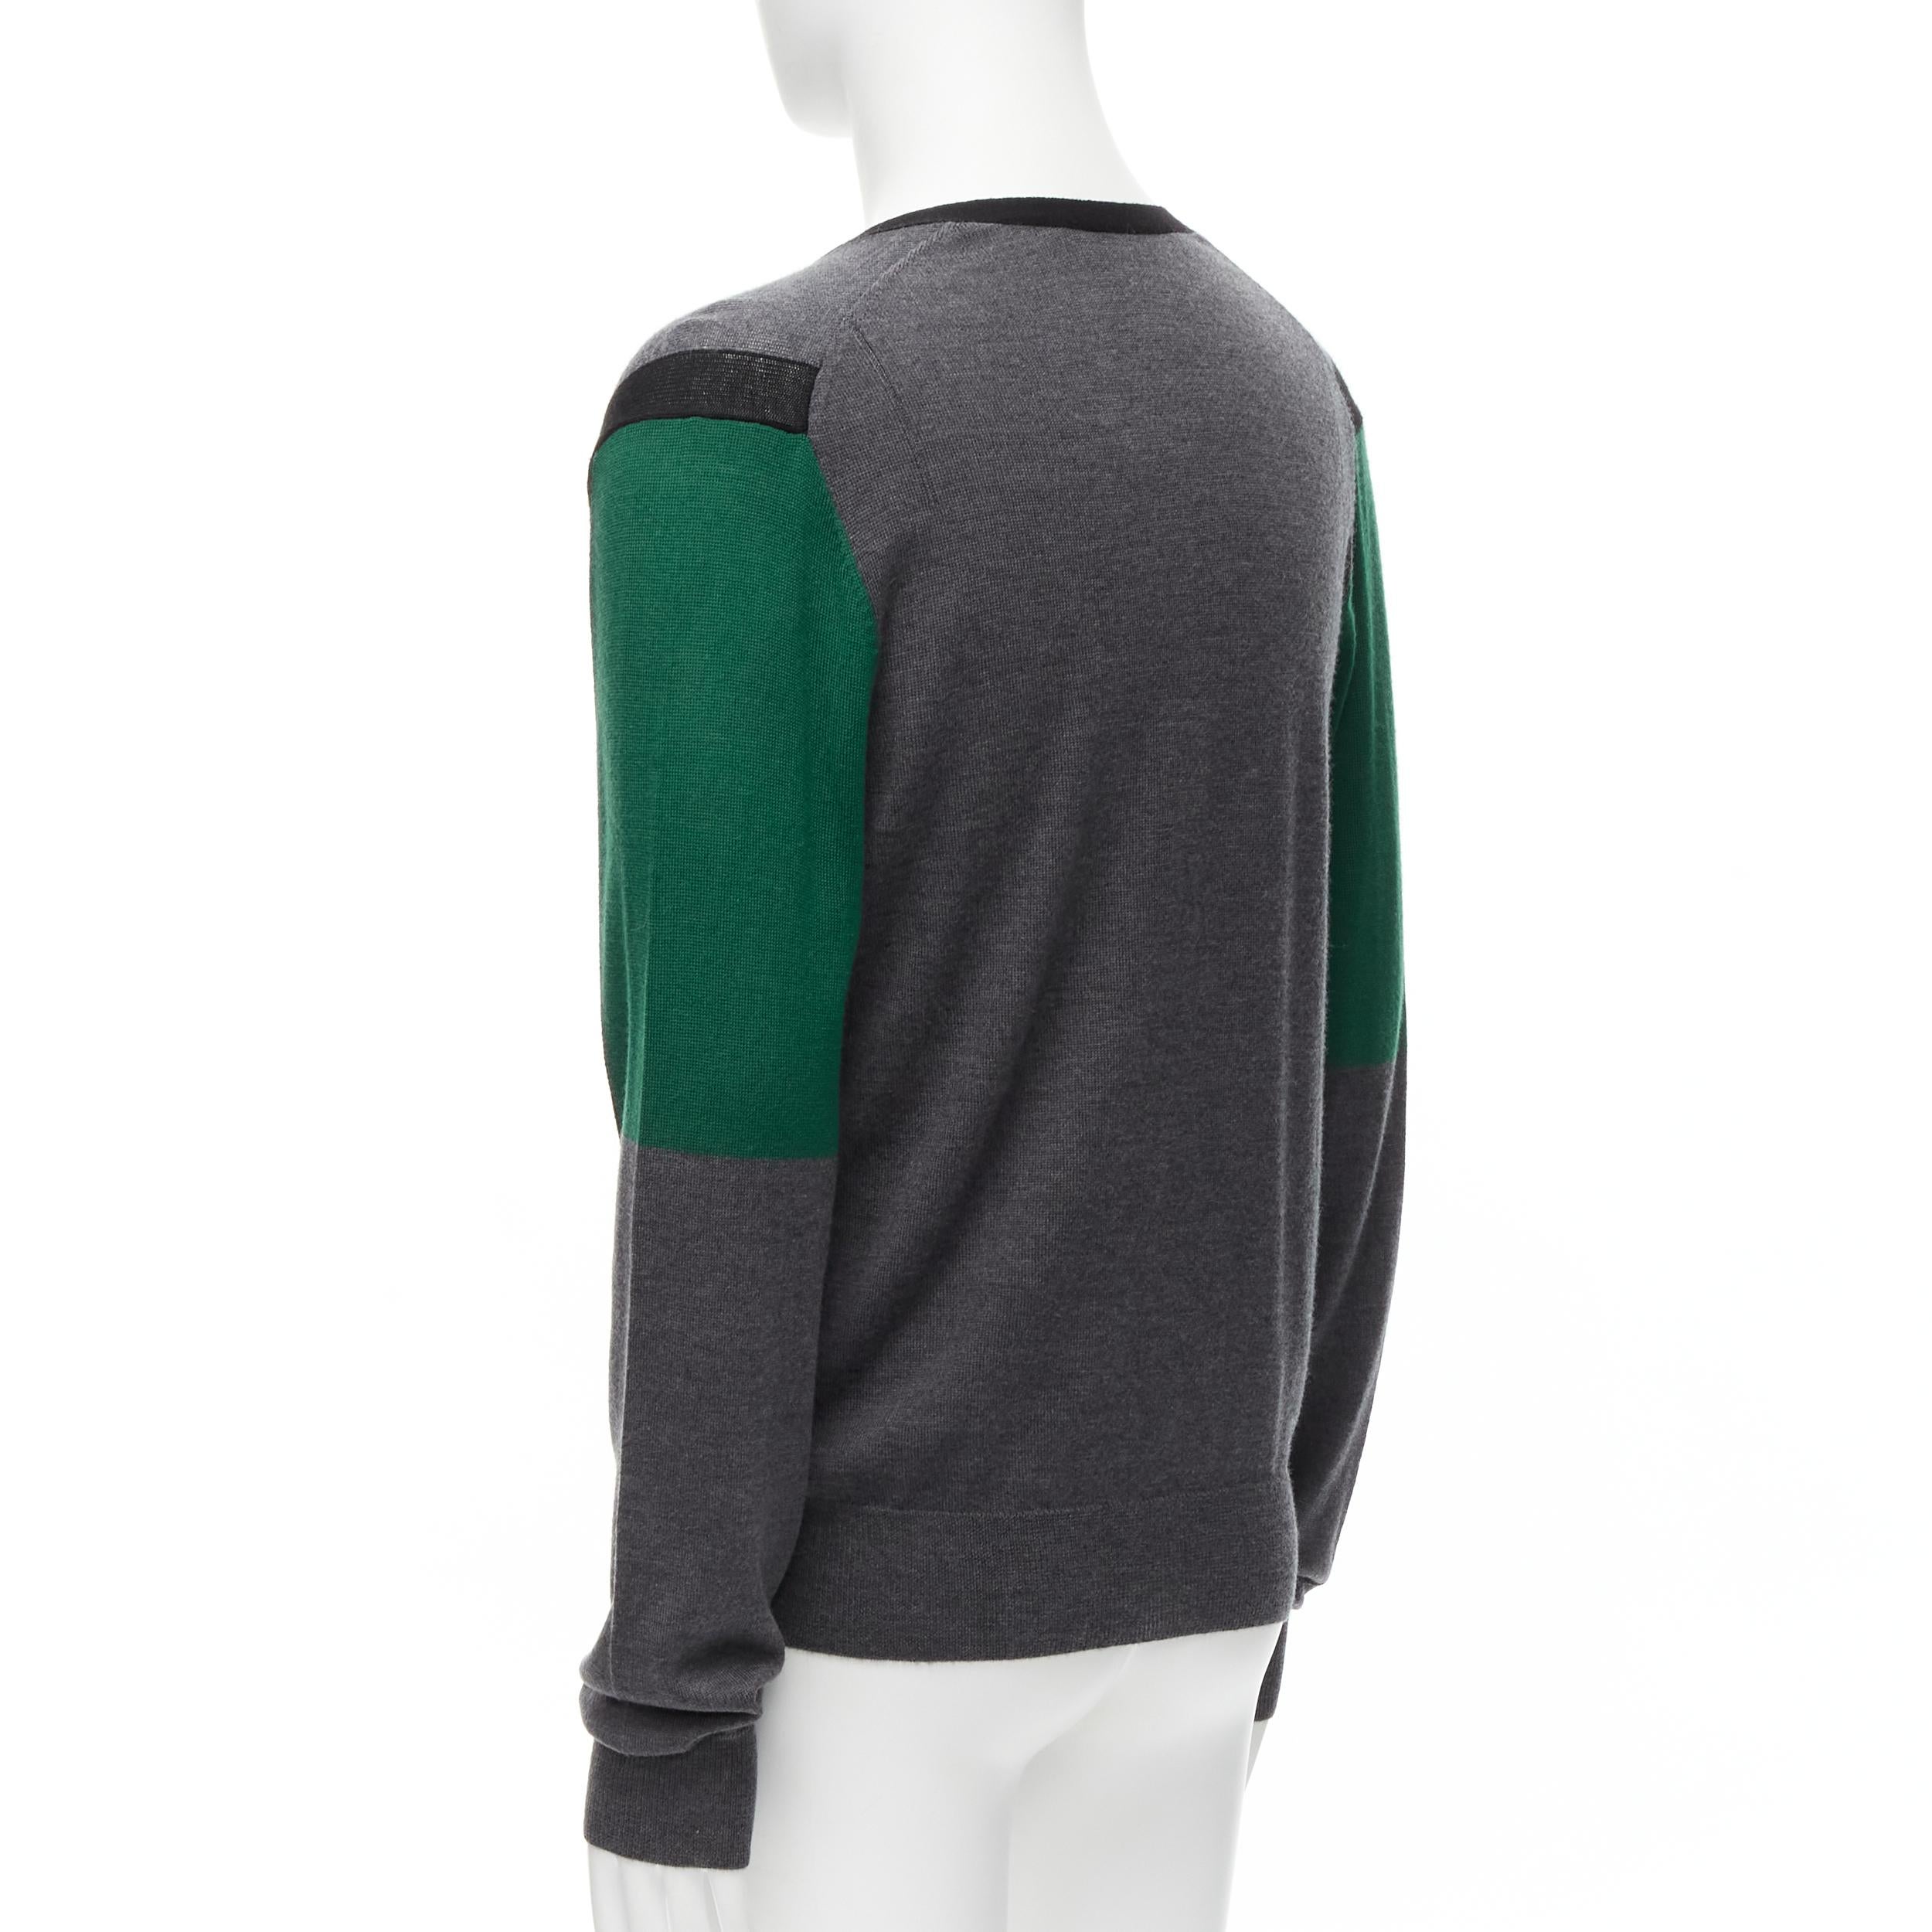 NEIL BARRETT green black grey colorblock virgin wool blend illusion cardigan M
Reference: YNWG/A00108
Brand: Neil Barrett
Material: Virgin Wool, Blend
Color: Green, Multicolour
Pattern: Solid
Closure: Button
Extra Details: Green colorblock panels on